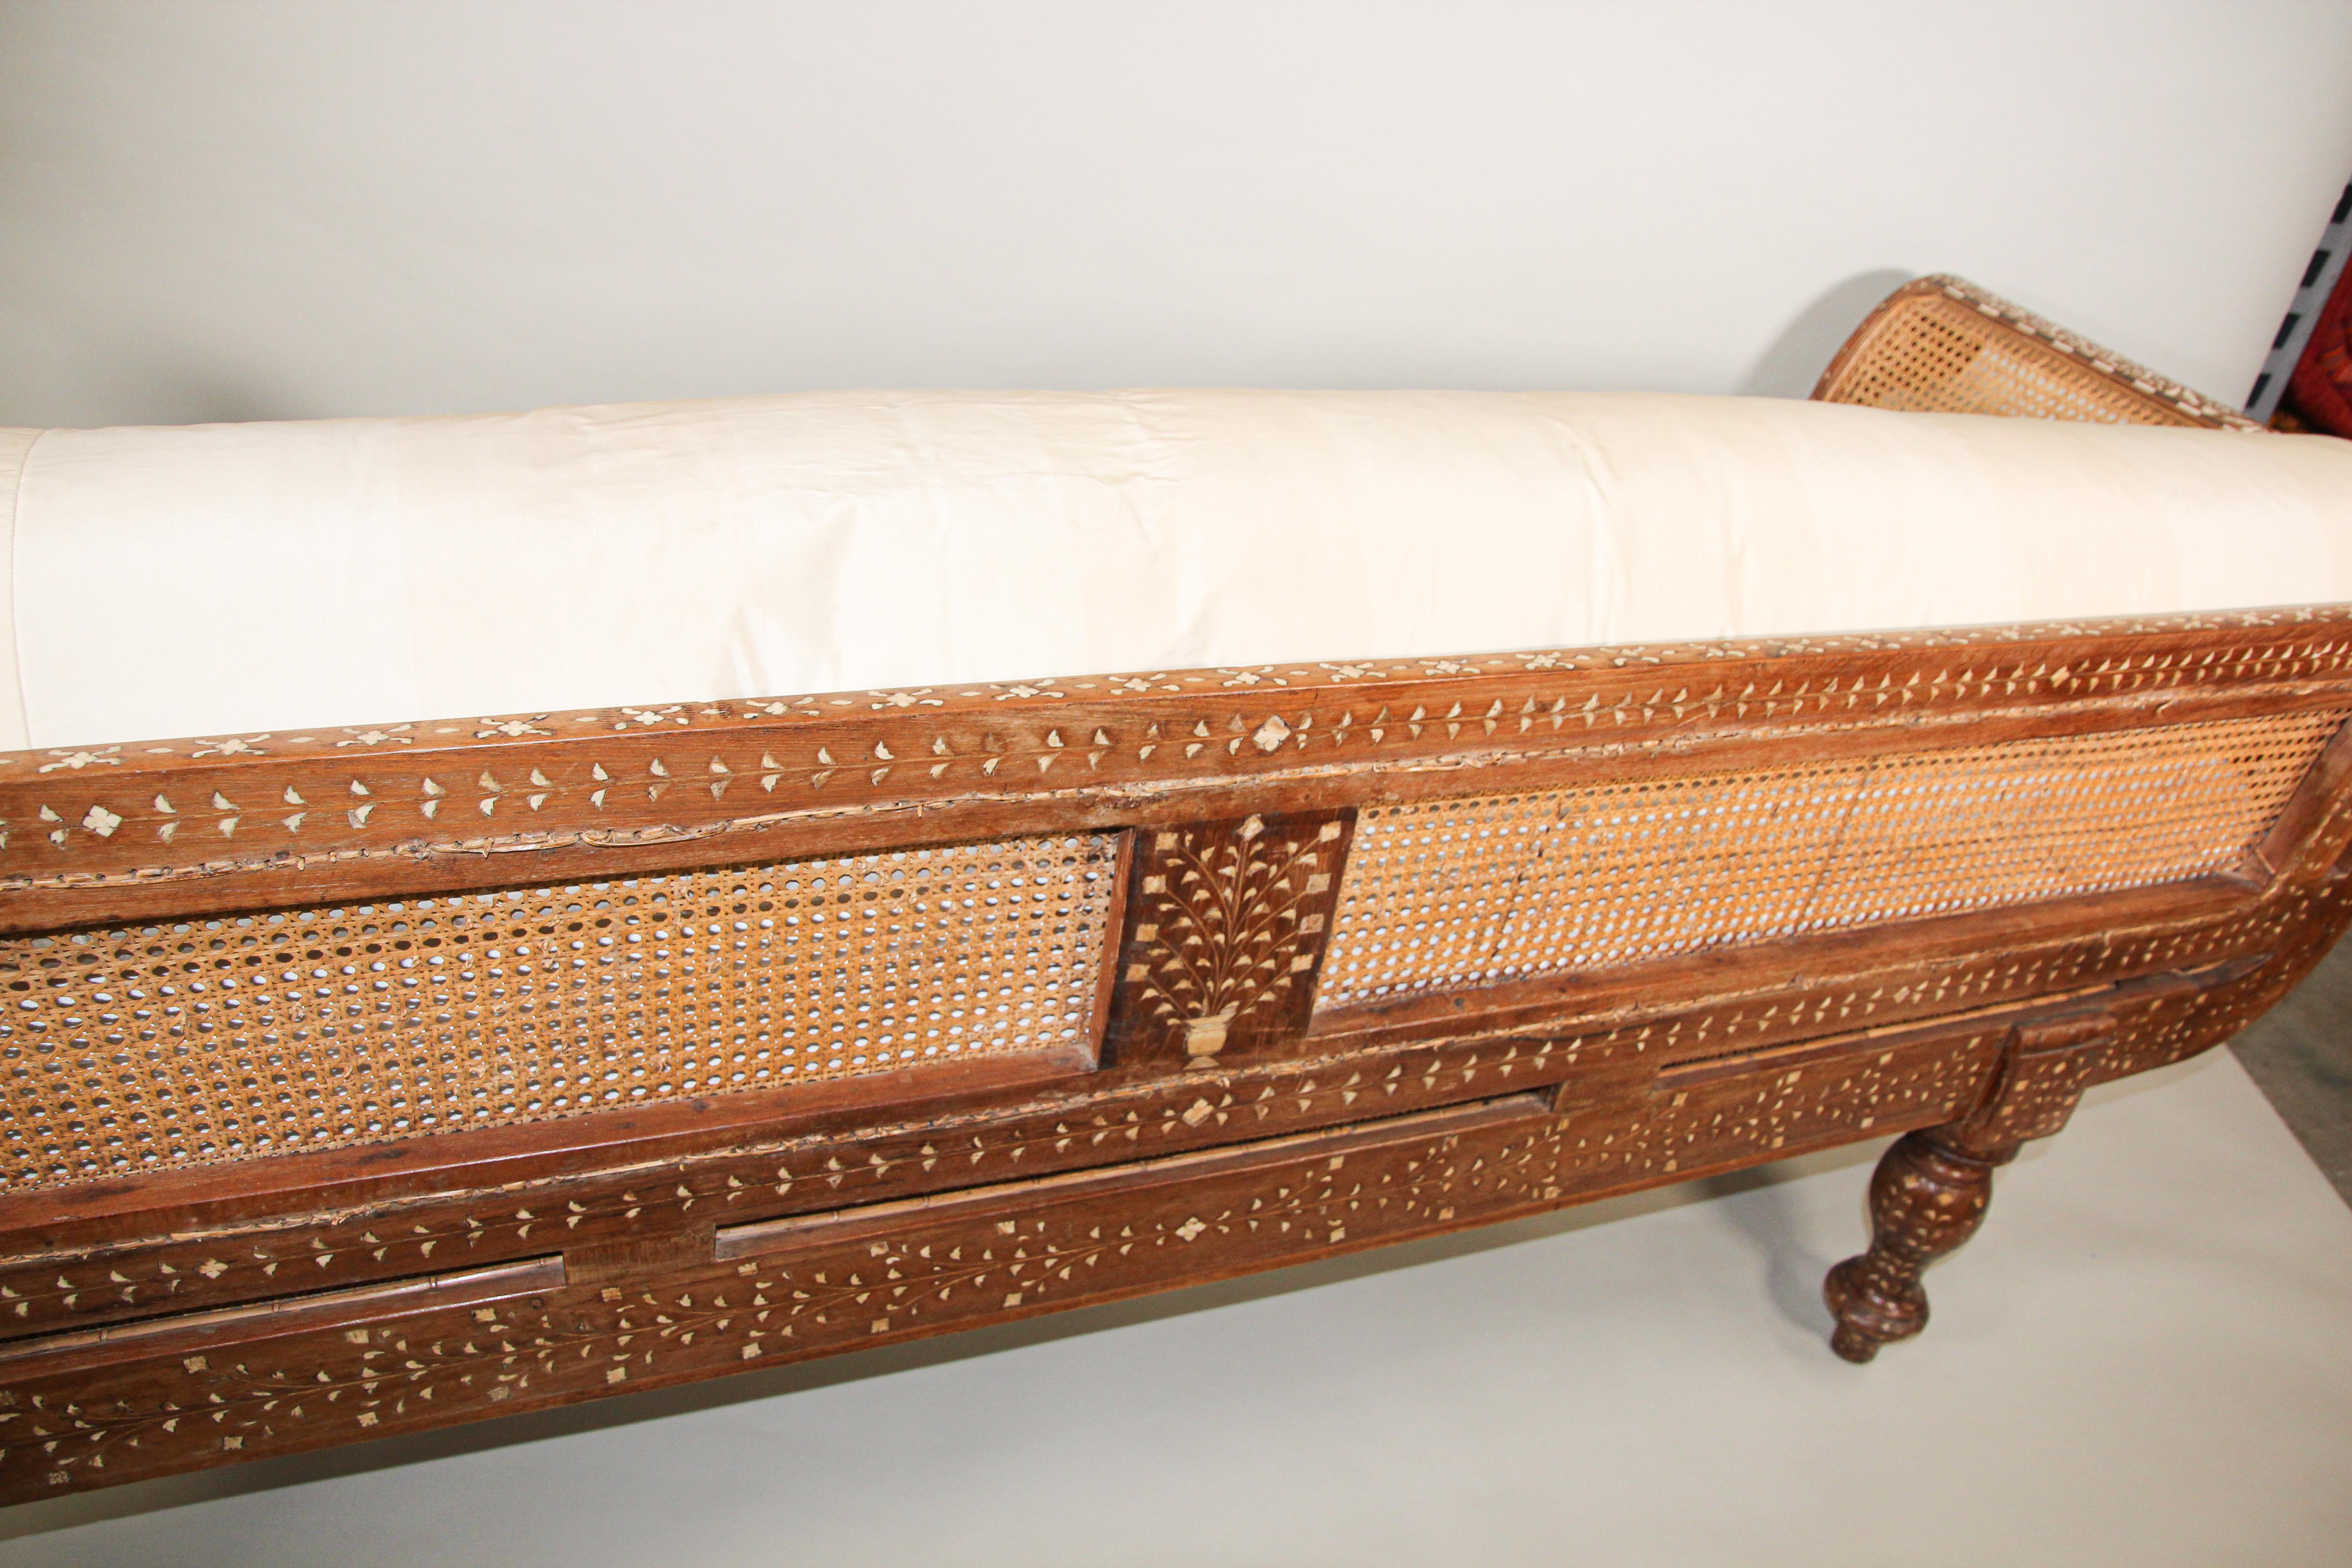 Large antique hand carved Anglo Indian sofa, day bed, heavily inlaid with bone.
The Anglo Indian colonial sofa is inlaid with bone and ebony inlays throughout.
Anglo-Indian settee bench handcrafted from hardwood, and wonderfully hand carved and